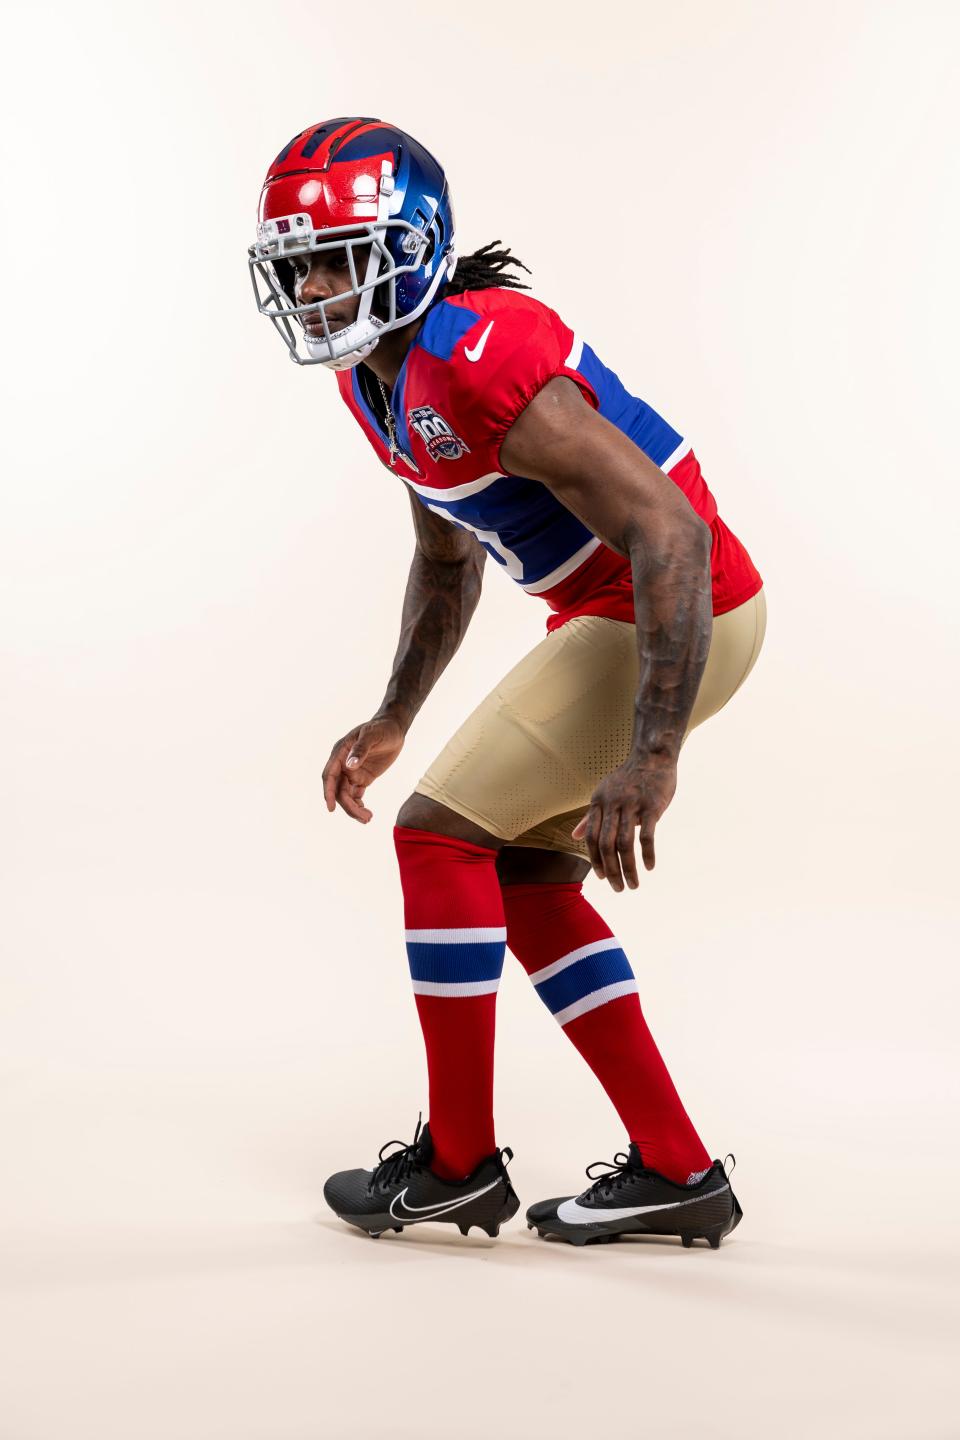 CB Deonte Banks (3) wearing the Giants' Century Red jerseys to commemorate the franchise's 100th season celebration.